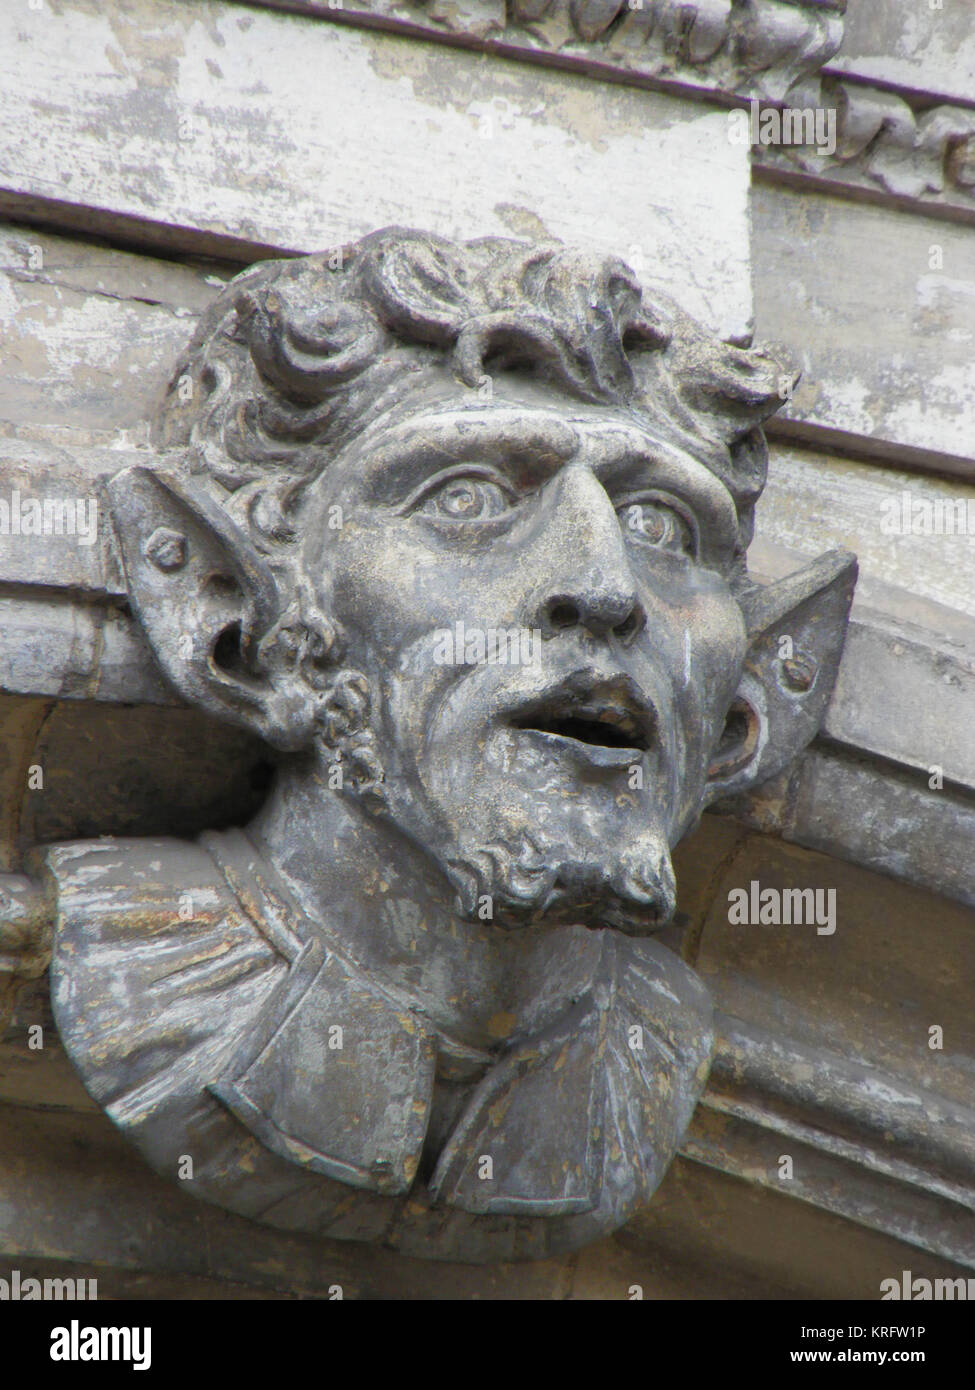 A sculpted head, which appears to be pinned by its ears over the doorway of the Guildhall, Worcester, Worcestershire.  There is a popular claim that it is the head of Oliver Cromwell, but it bears no likeness to him.      Date: 2011 Stock Photo